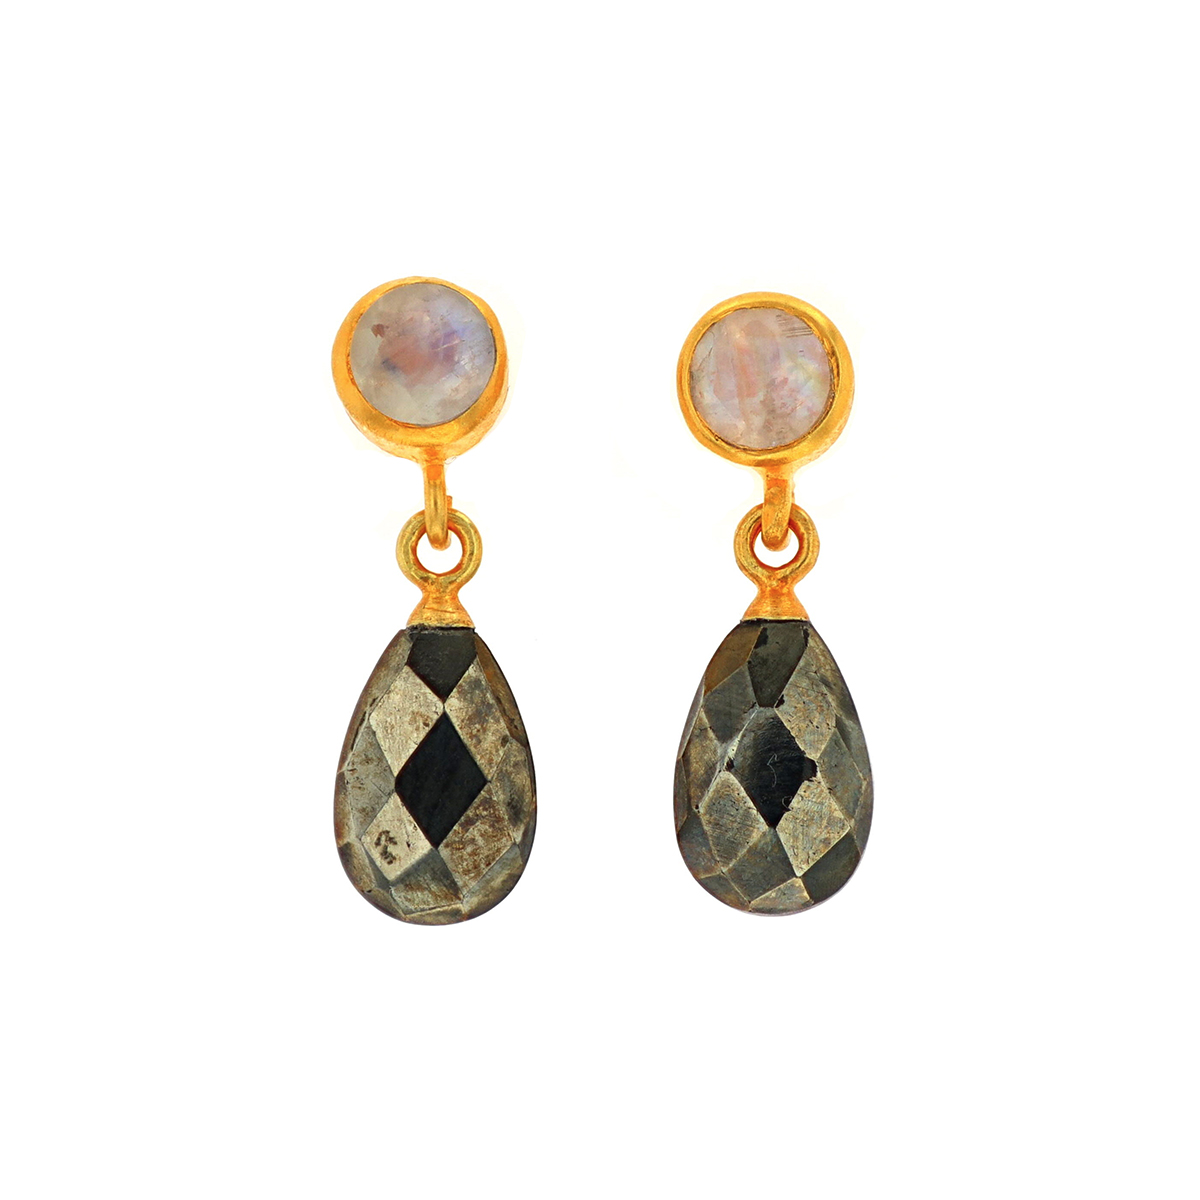 24K Gold Plated Sterling Silver Pyrite and Moonstone Earrings